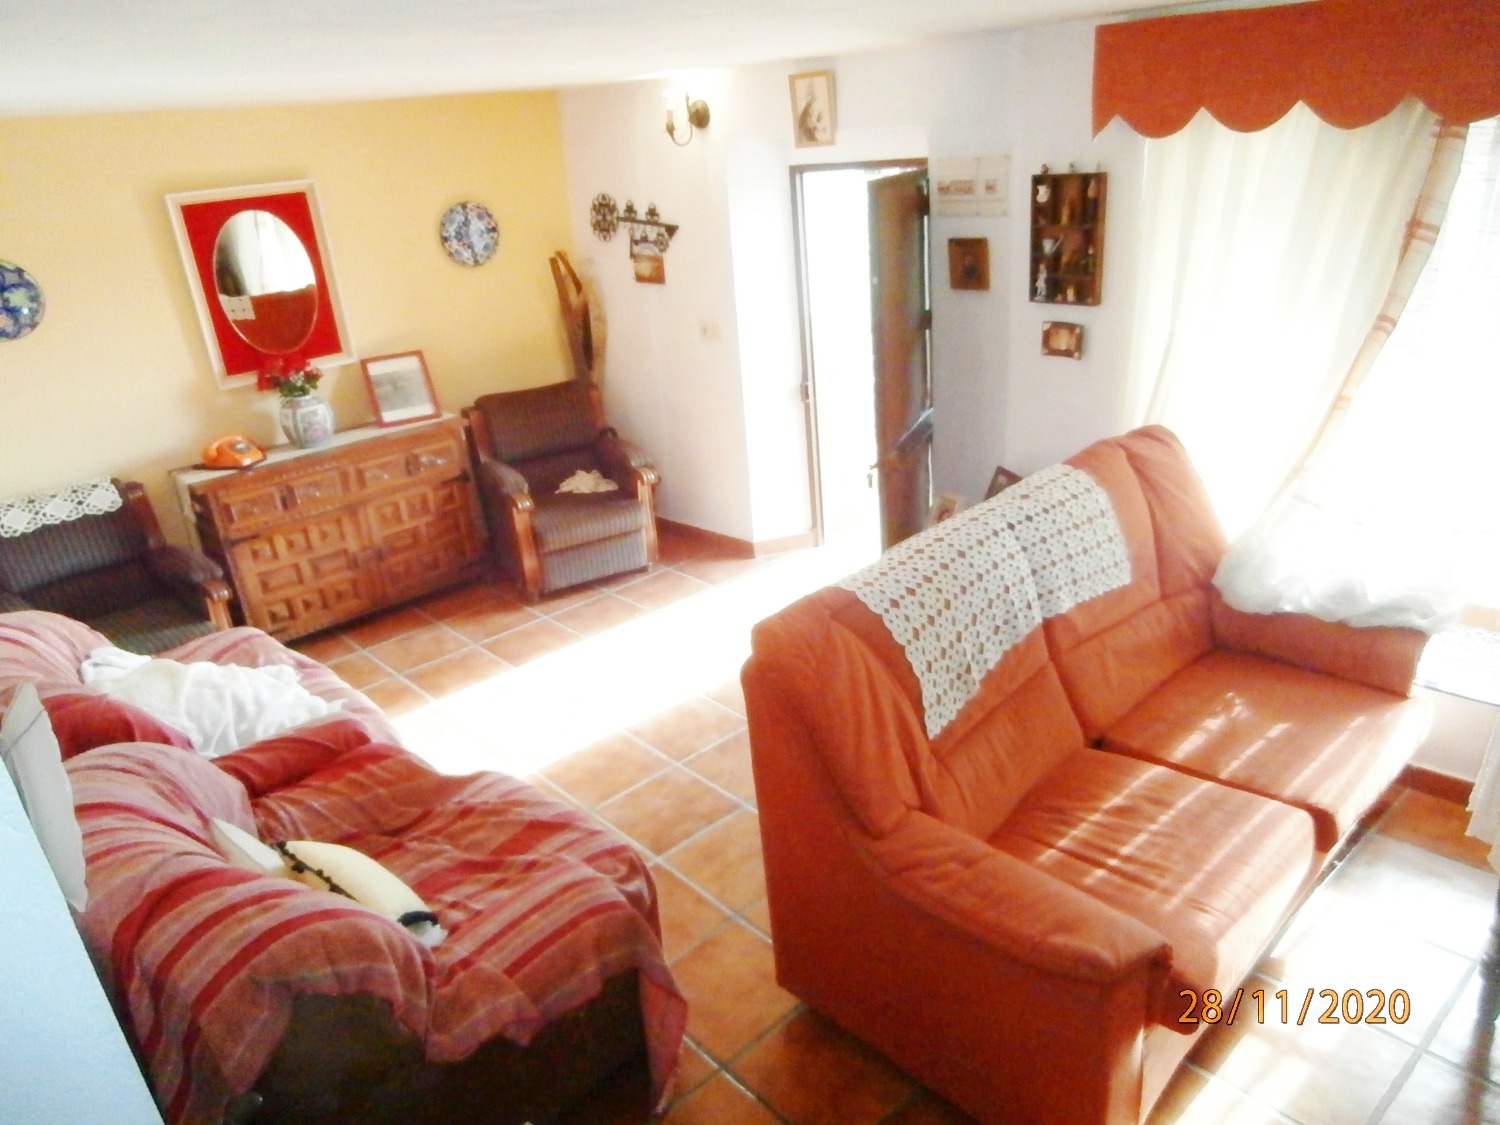 Large Andalusian-style semi-detached country house with pool, arable land, fully fenced 3,220 m2 approx, good access.